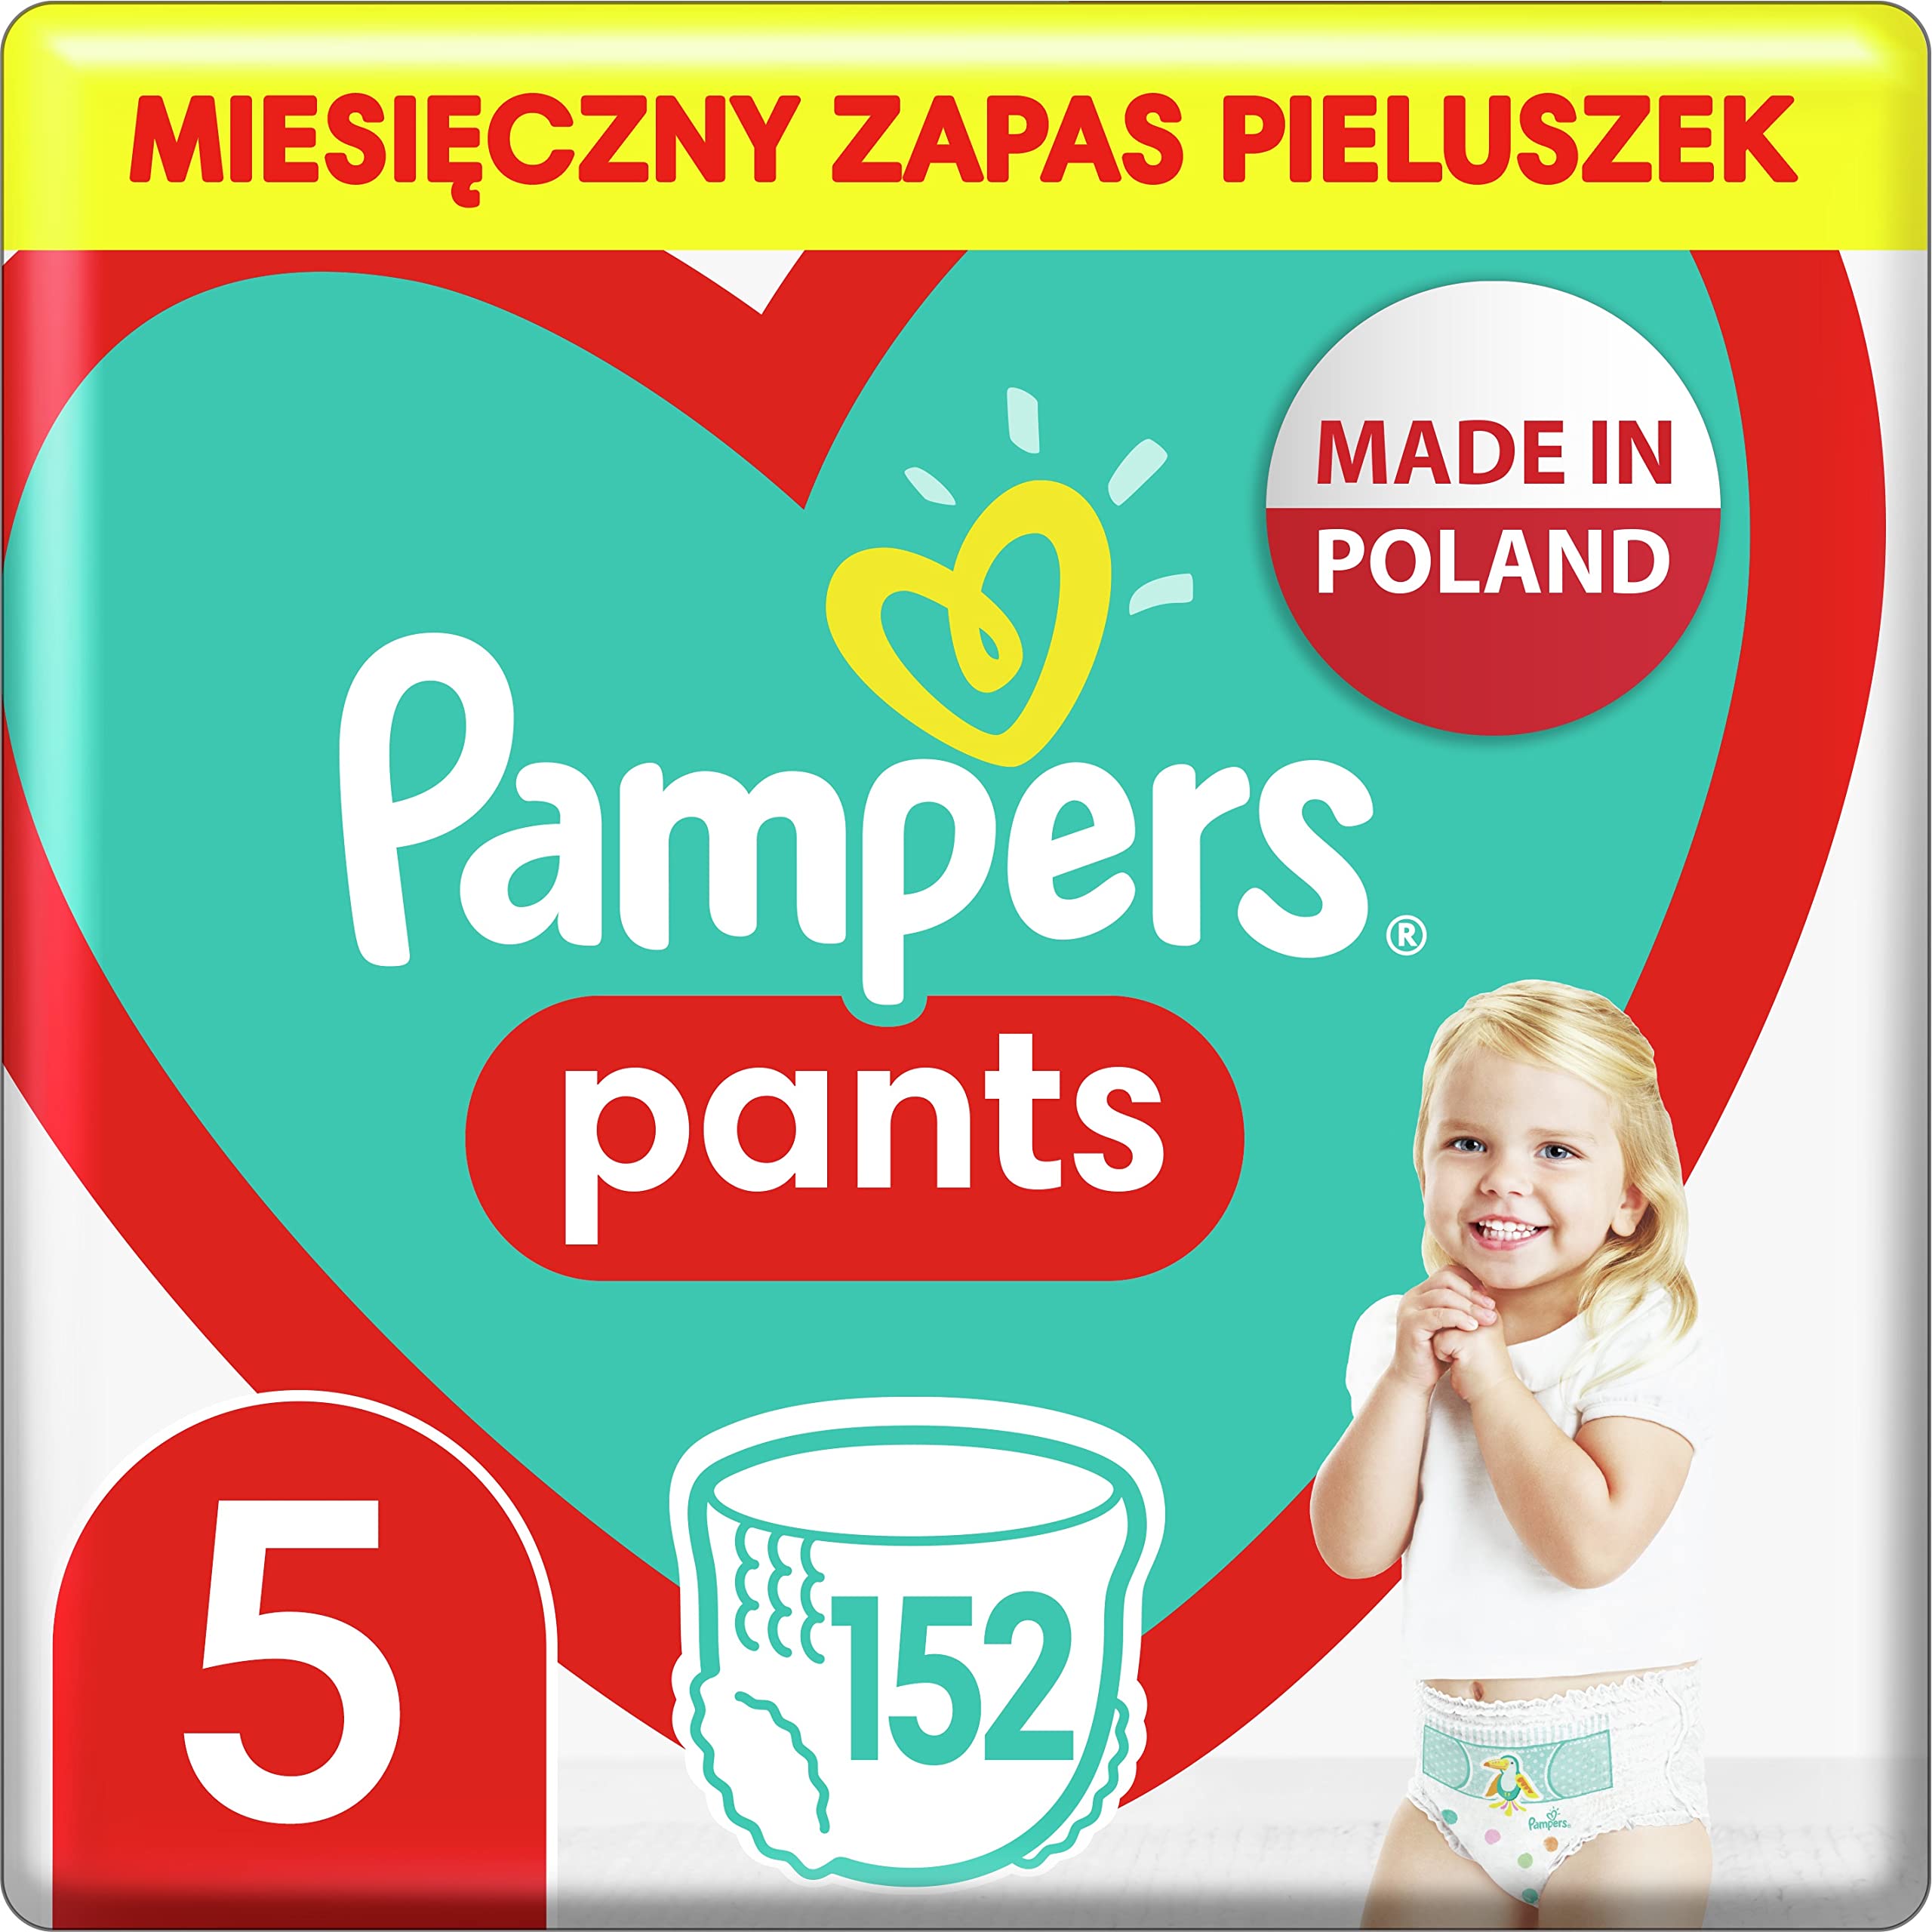 pampers new baby 228